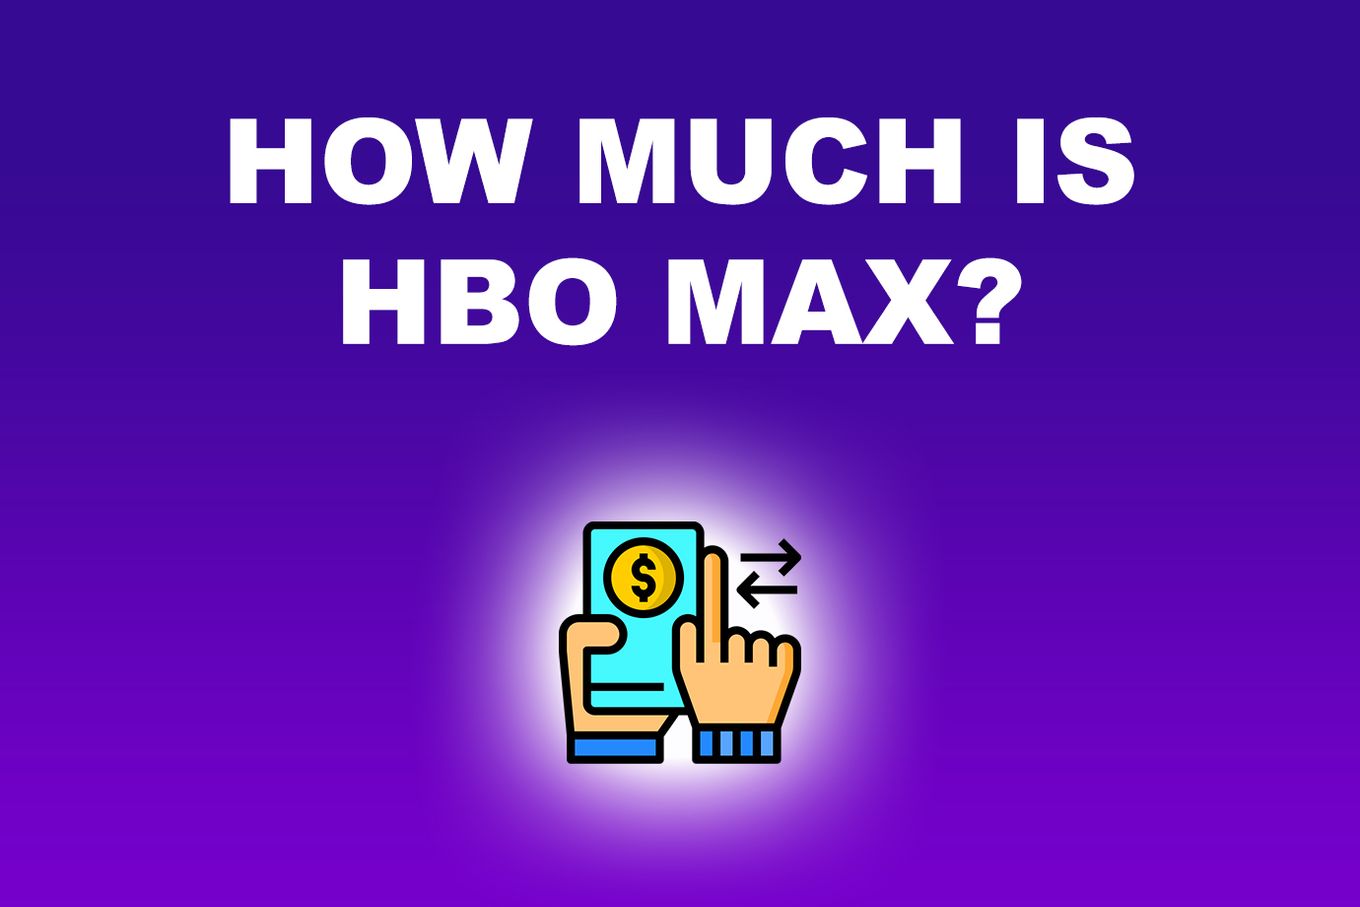 How Much Is HBO Max?